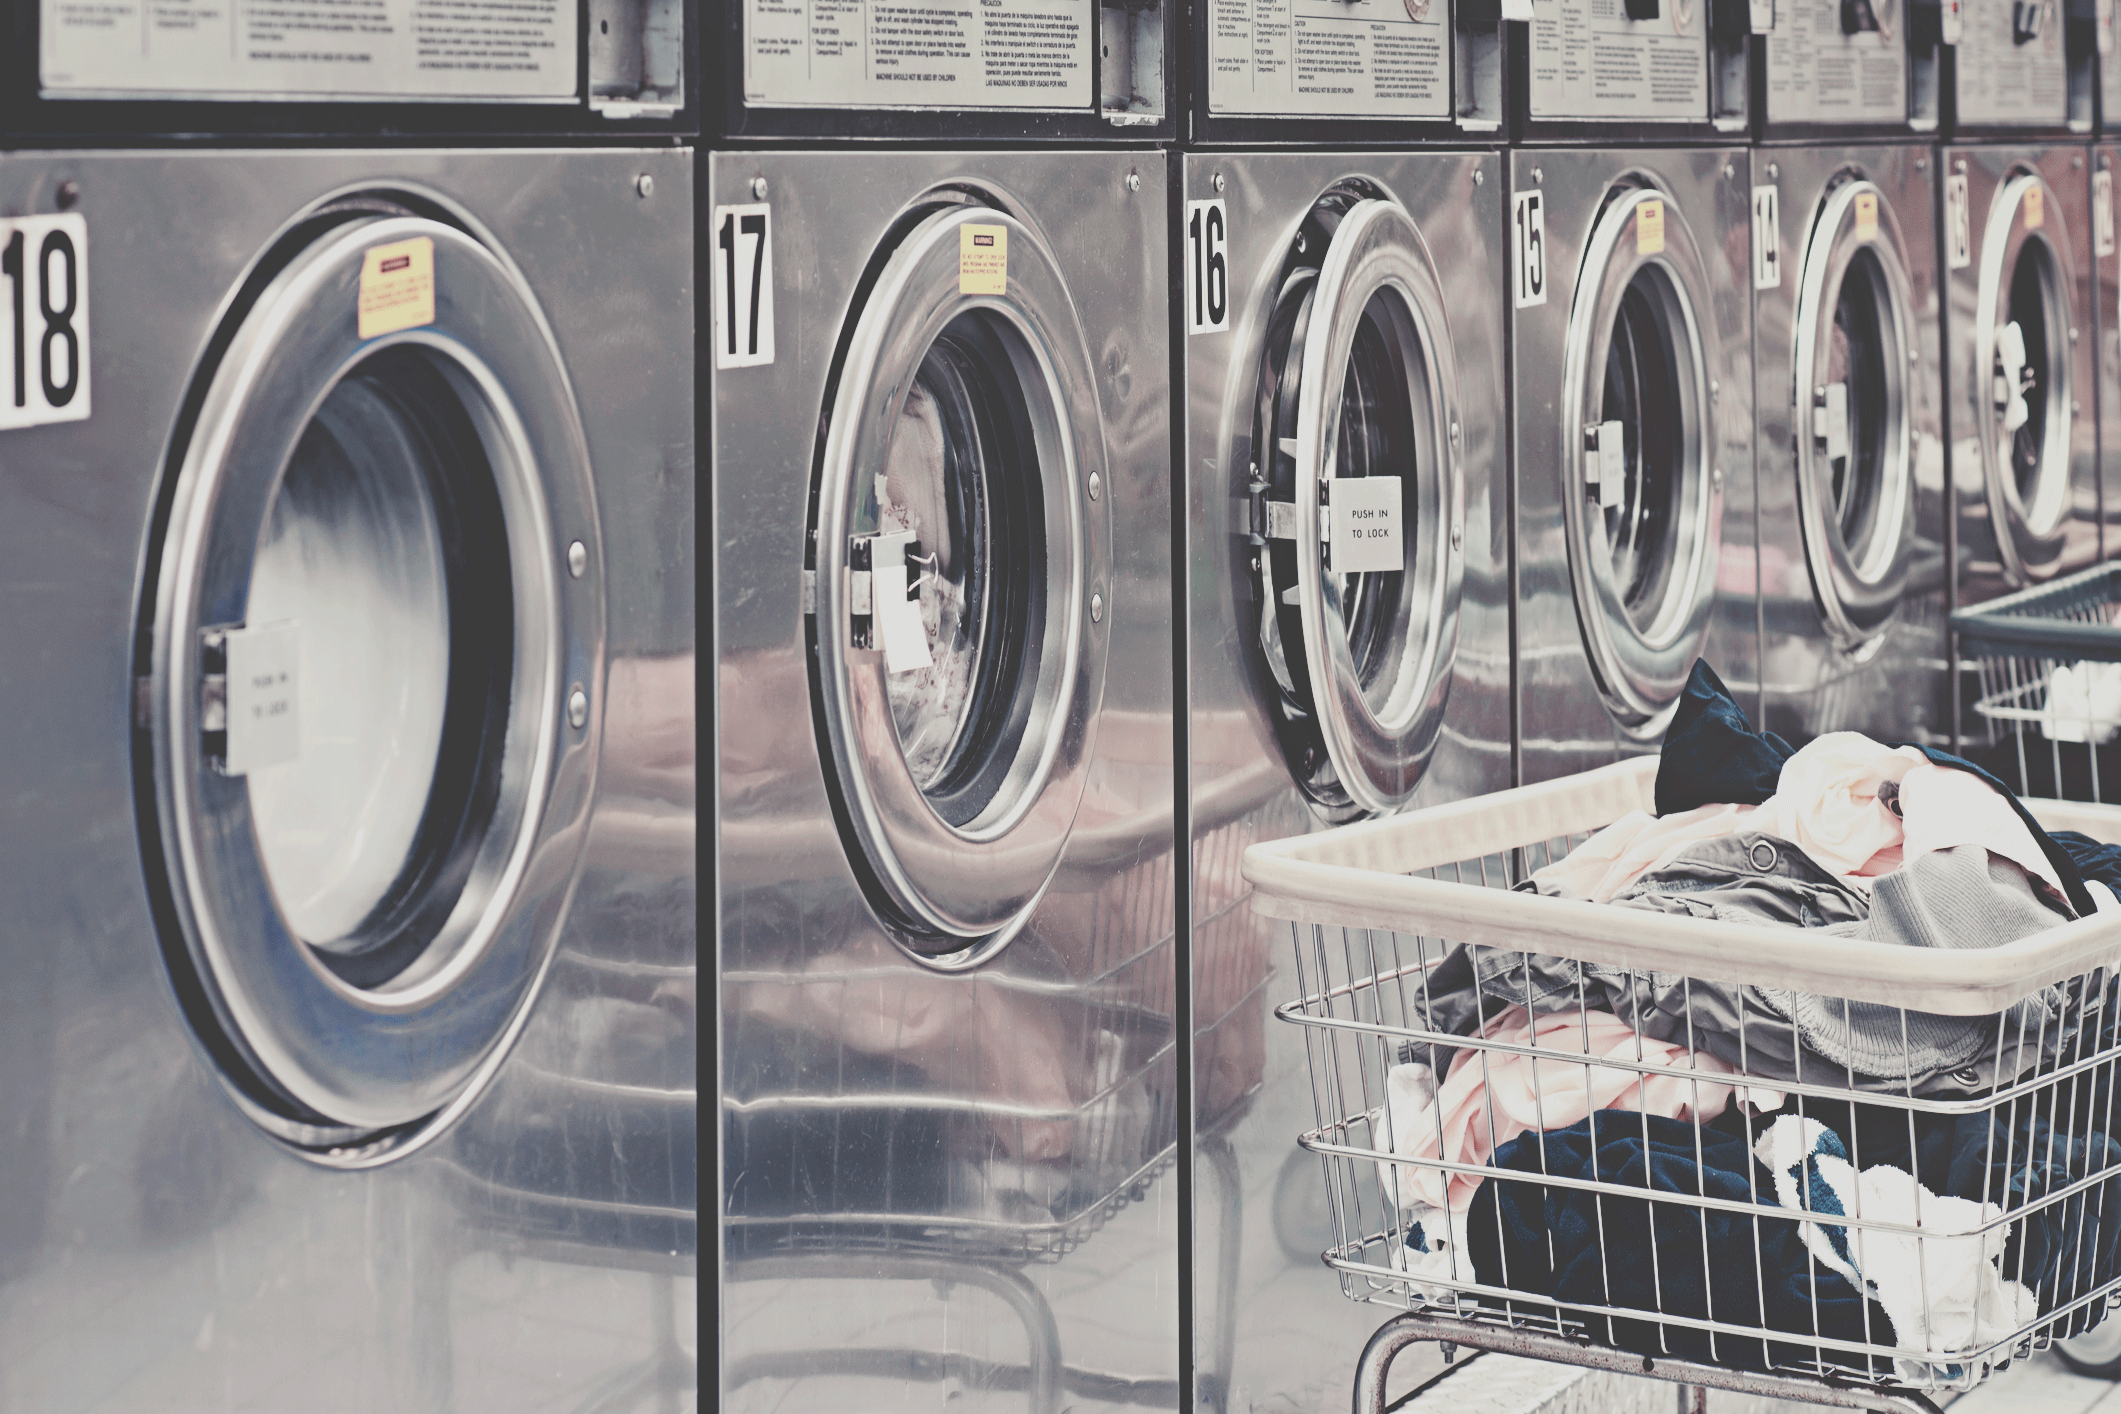 With AristoCraft custom portals, laundromats can easily access all their account information and place orders 24 x 7.